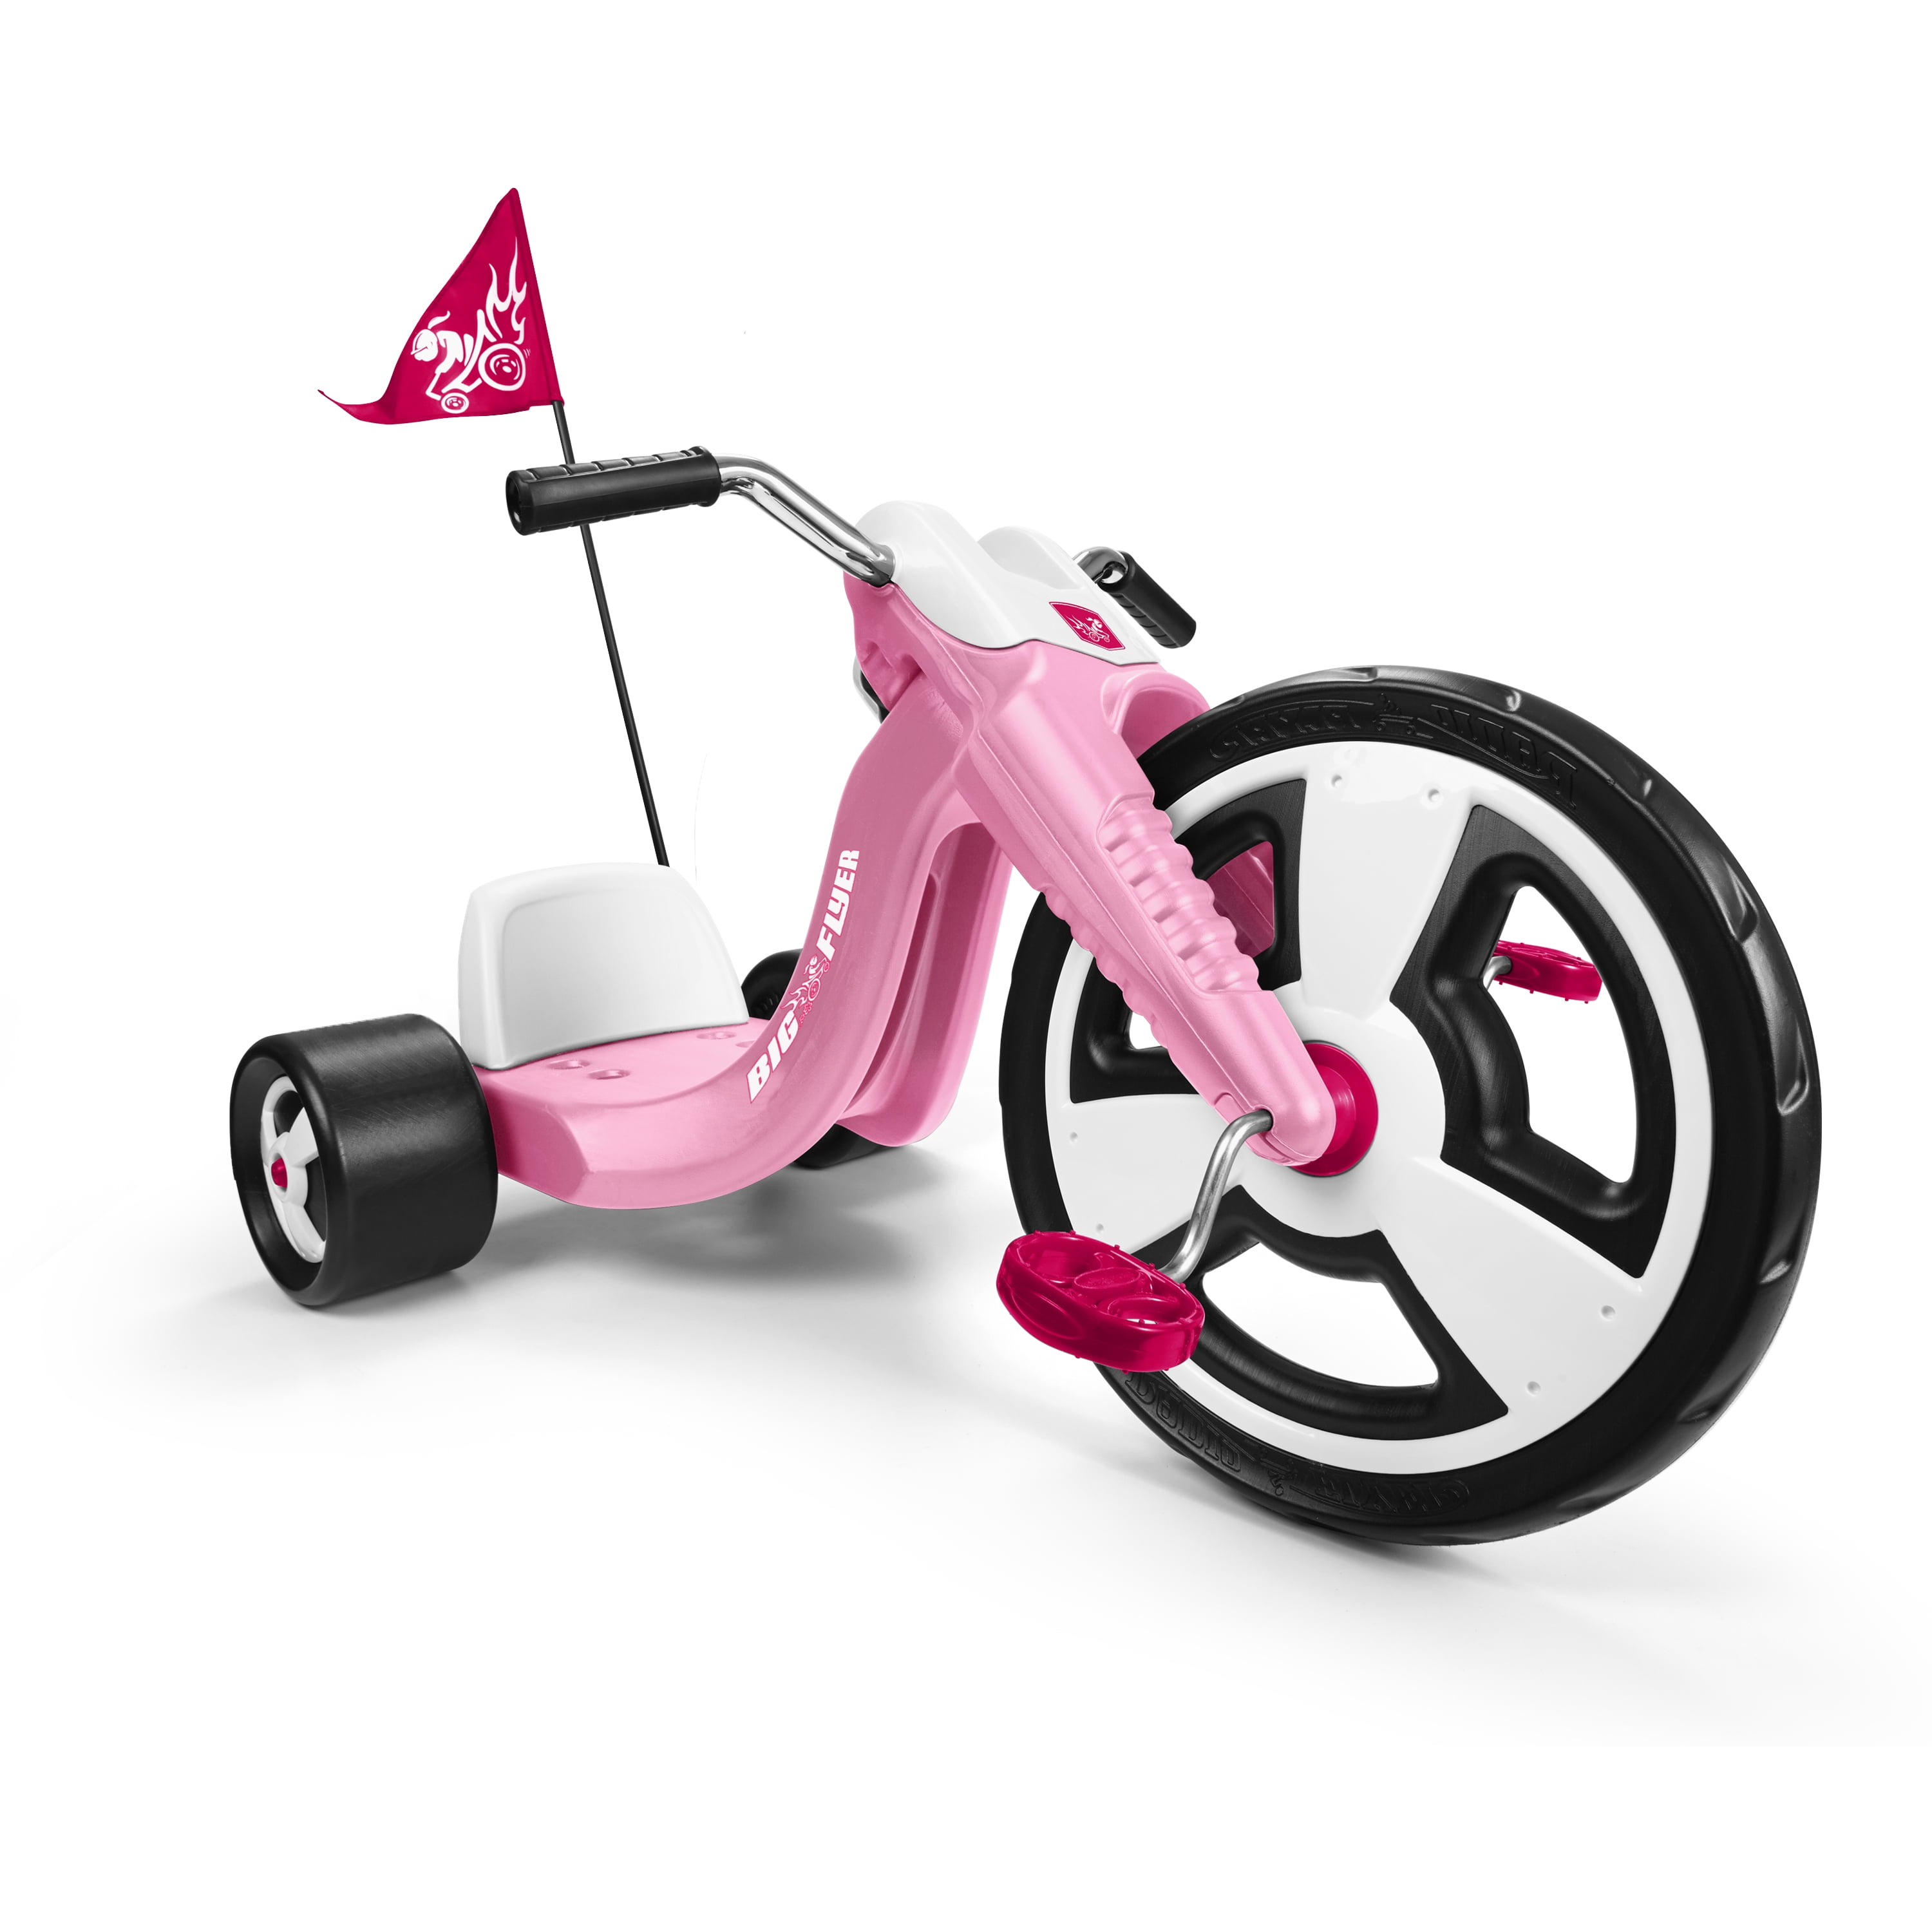 Kids Big Flyer Chopper Tricycle 16 Front Wheel Adjustable Seat Sports Toy Pink for sale online 